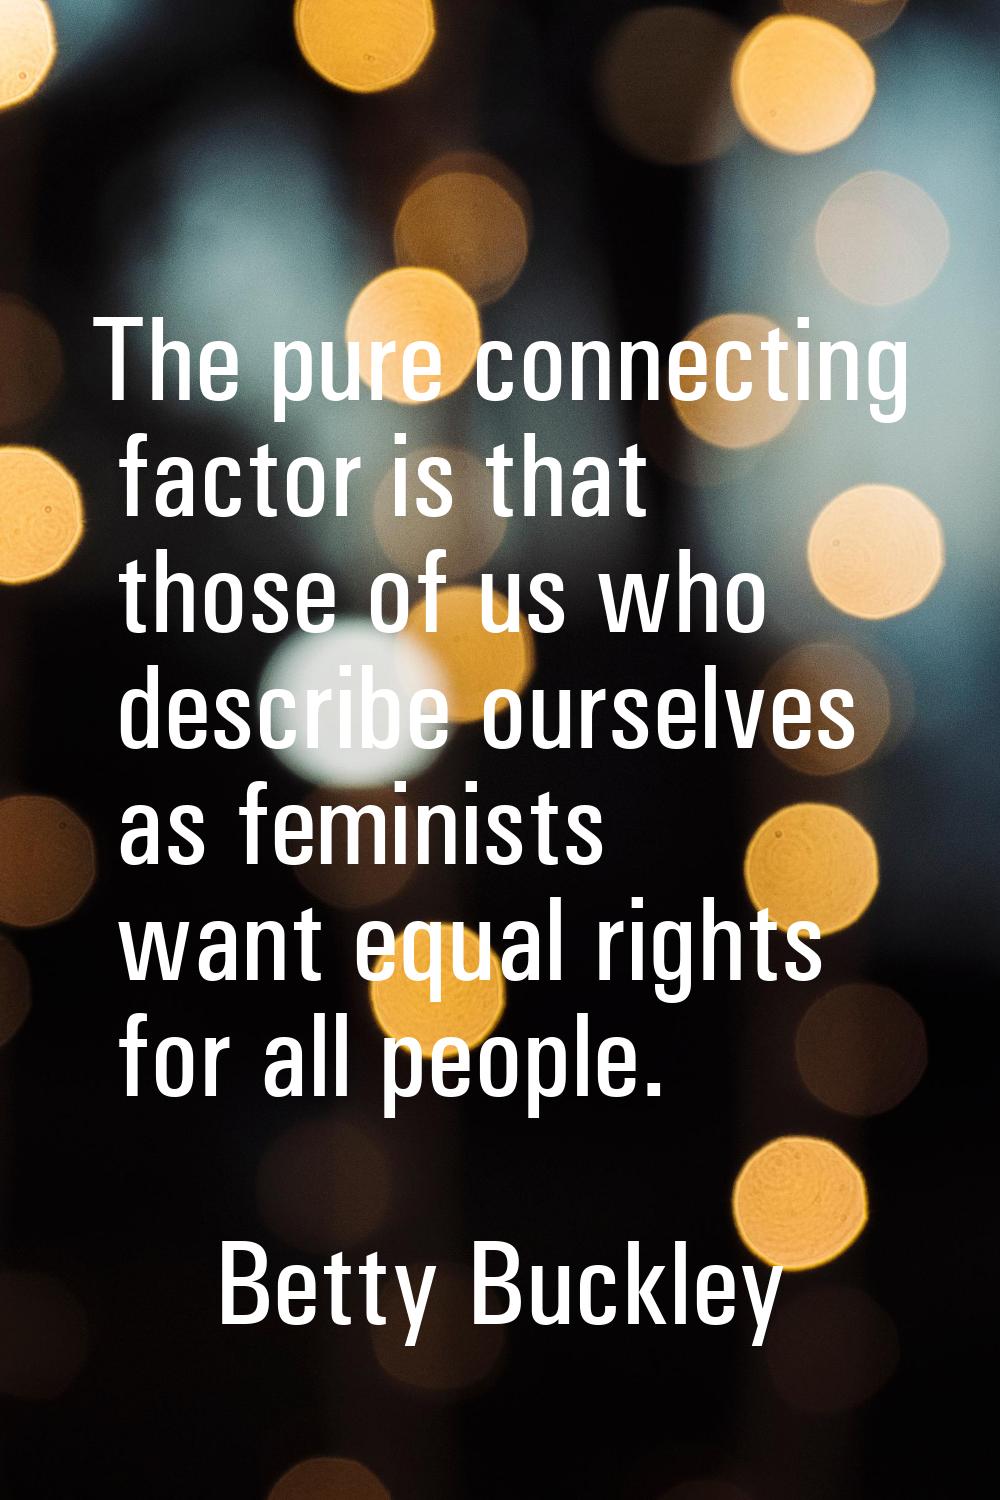 The pure connecting factor is that those of us who describe ourselves as feminists want equal right